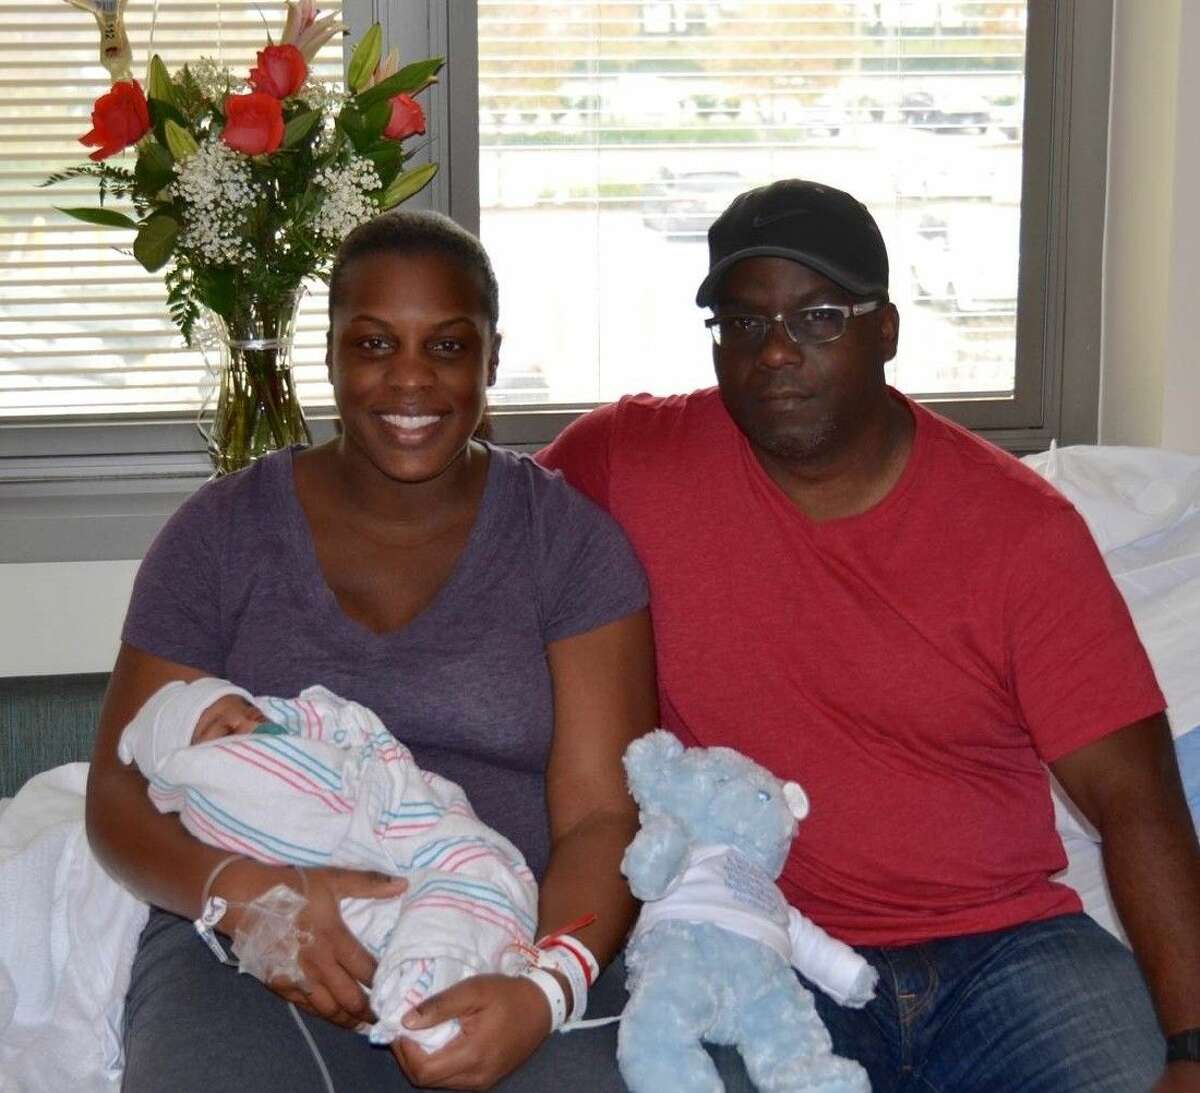 Zurich Owen Johnson was the first baby born at Methodist Willowbrook Hospital in 2016. He is with his parents Roxanne Dismuke and Warren Johnson.